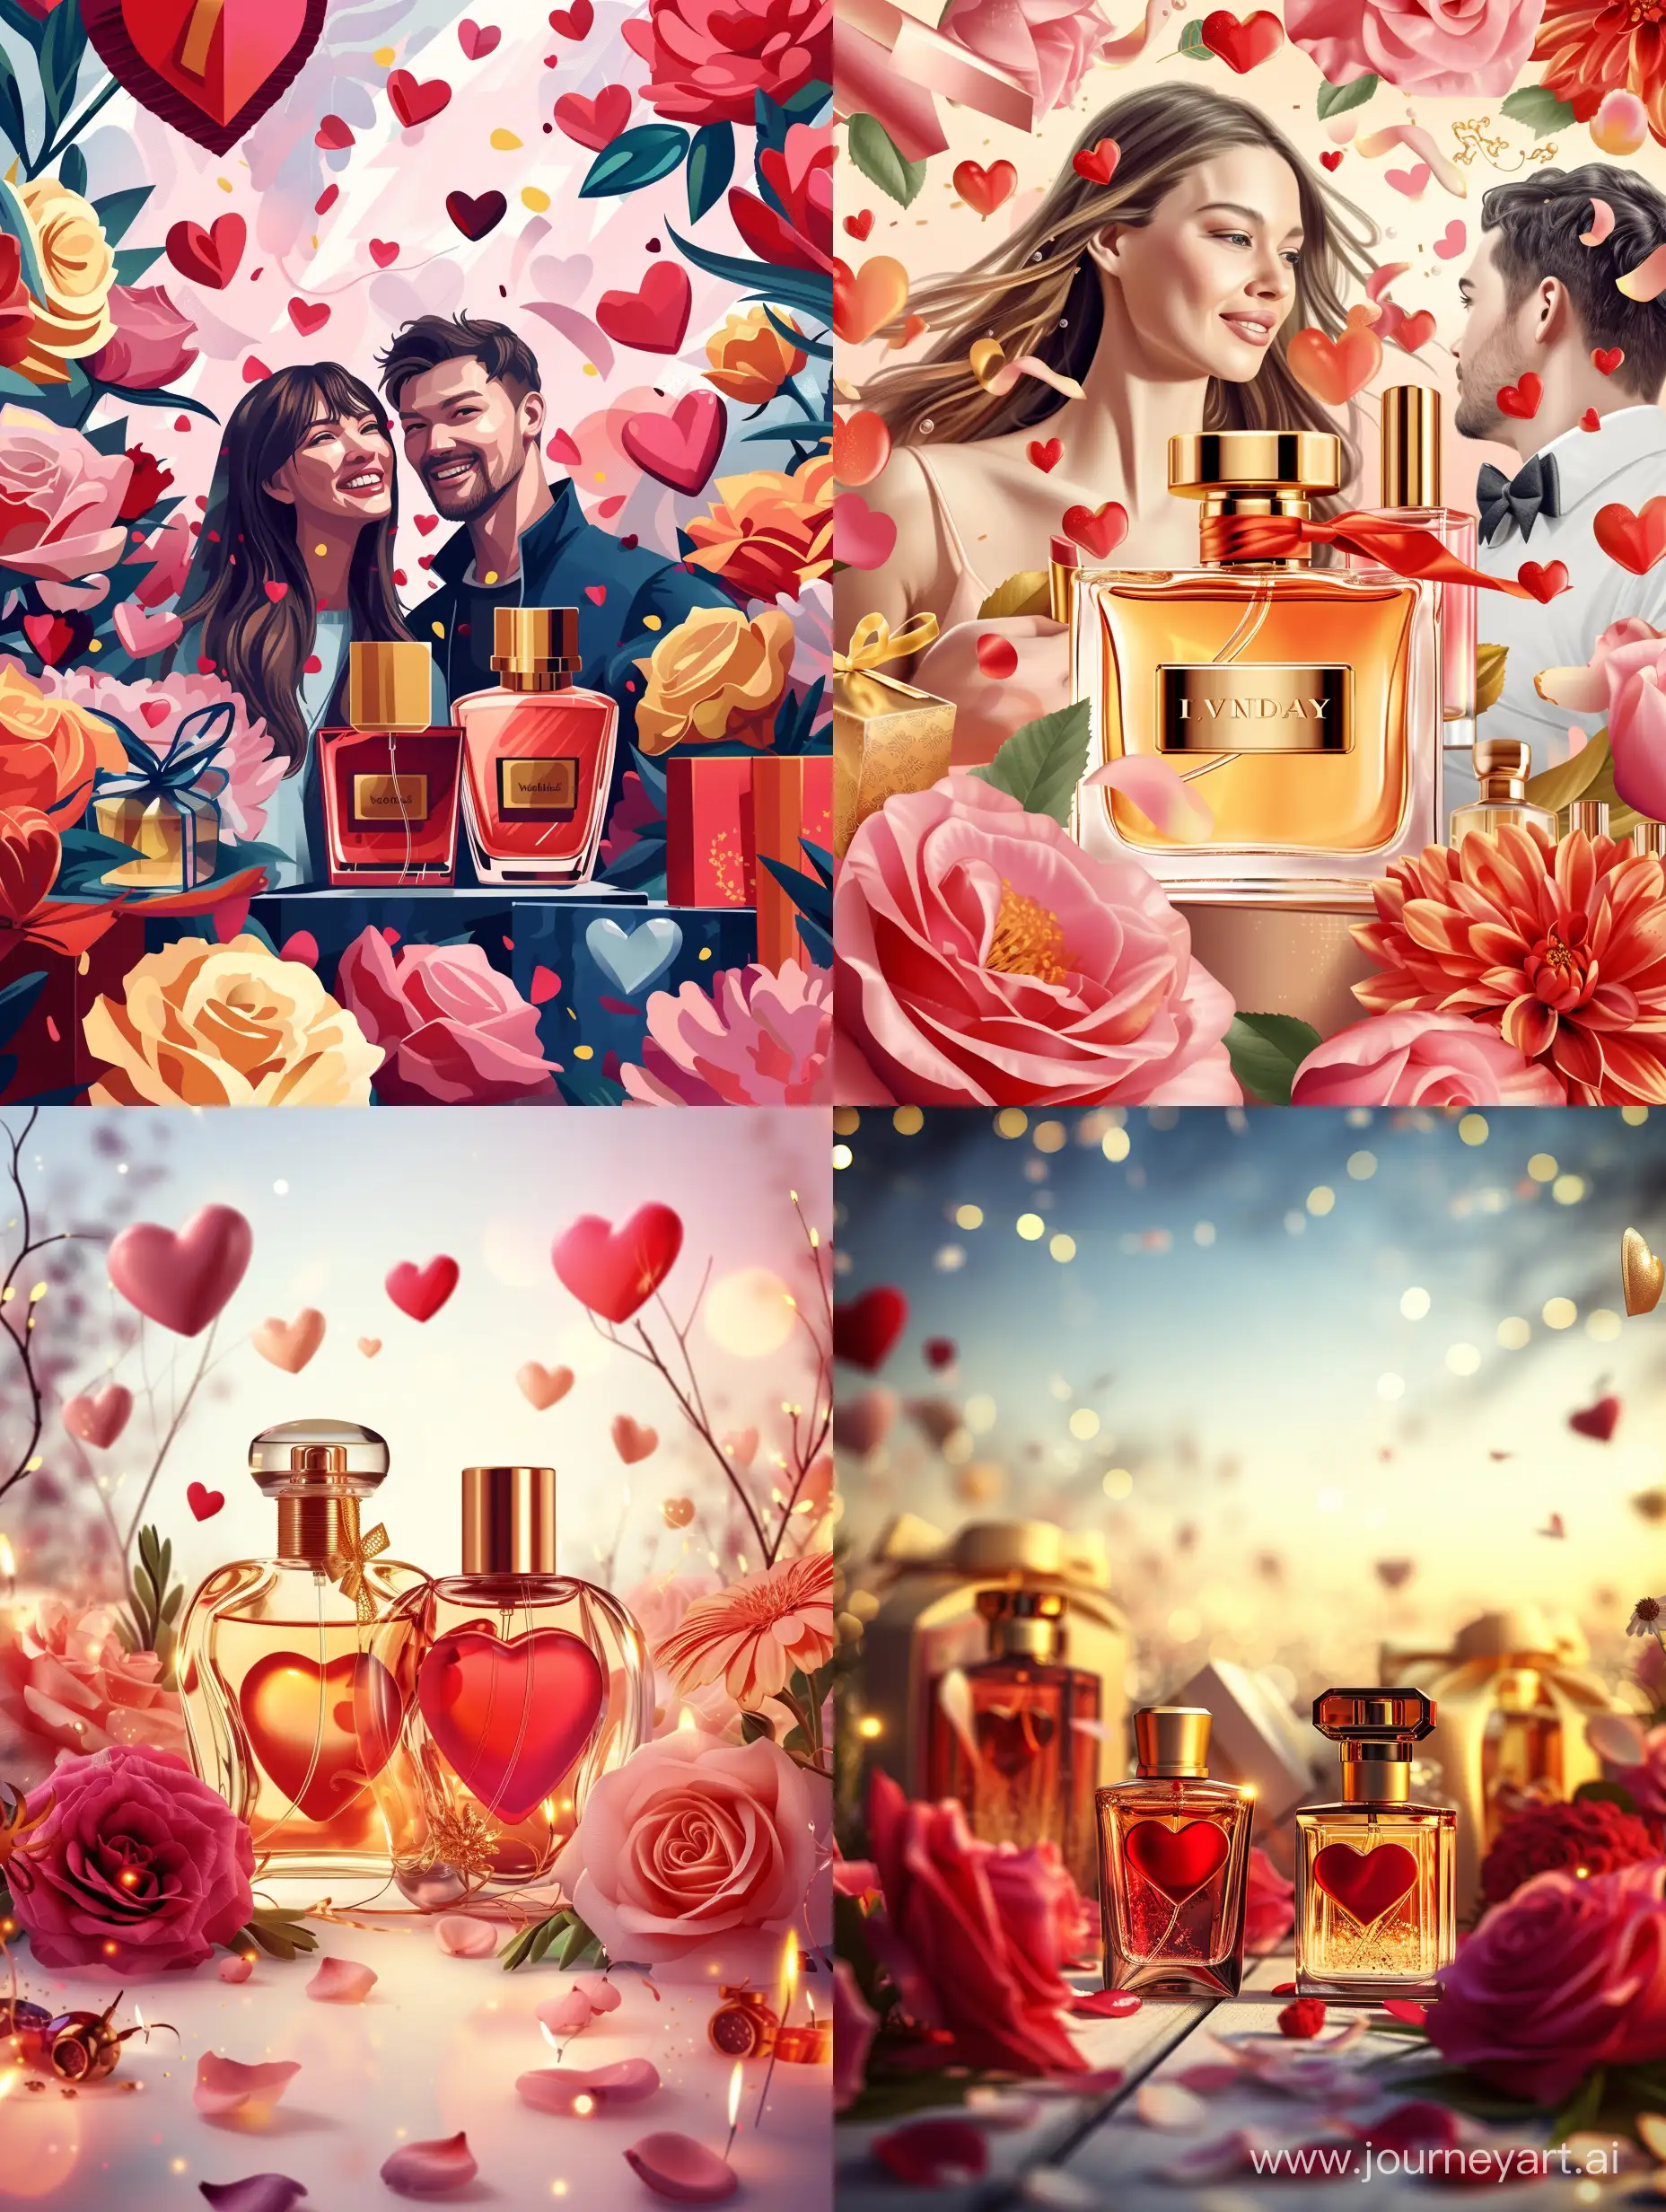 Romantic-Valentines-Day-Celebration-with-Flowers-Hearts-and-Perfume